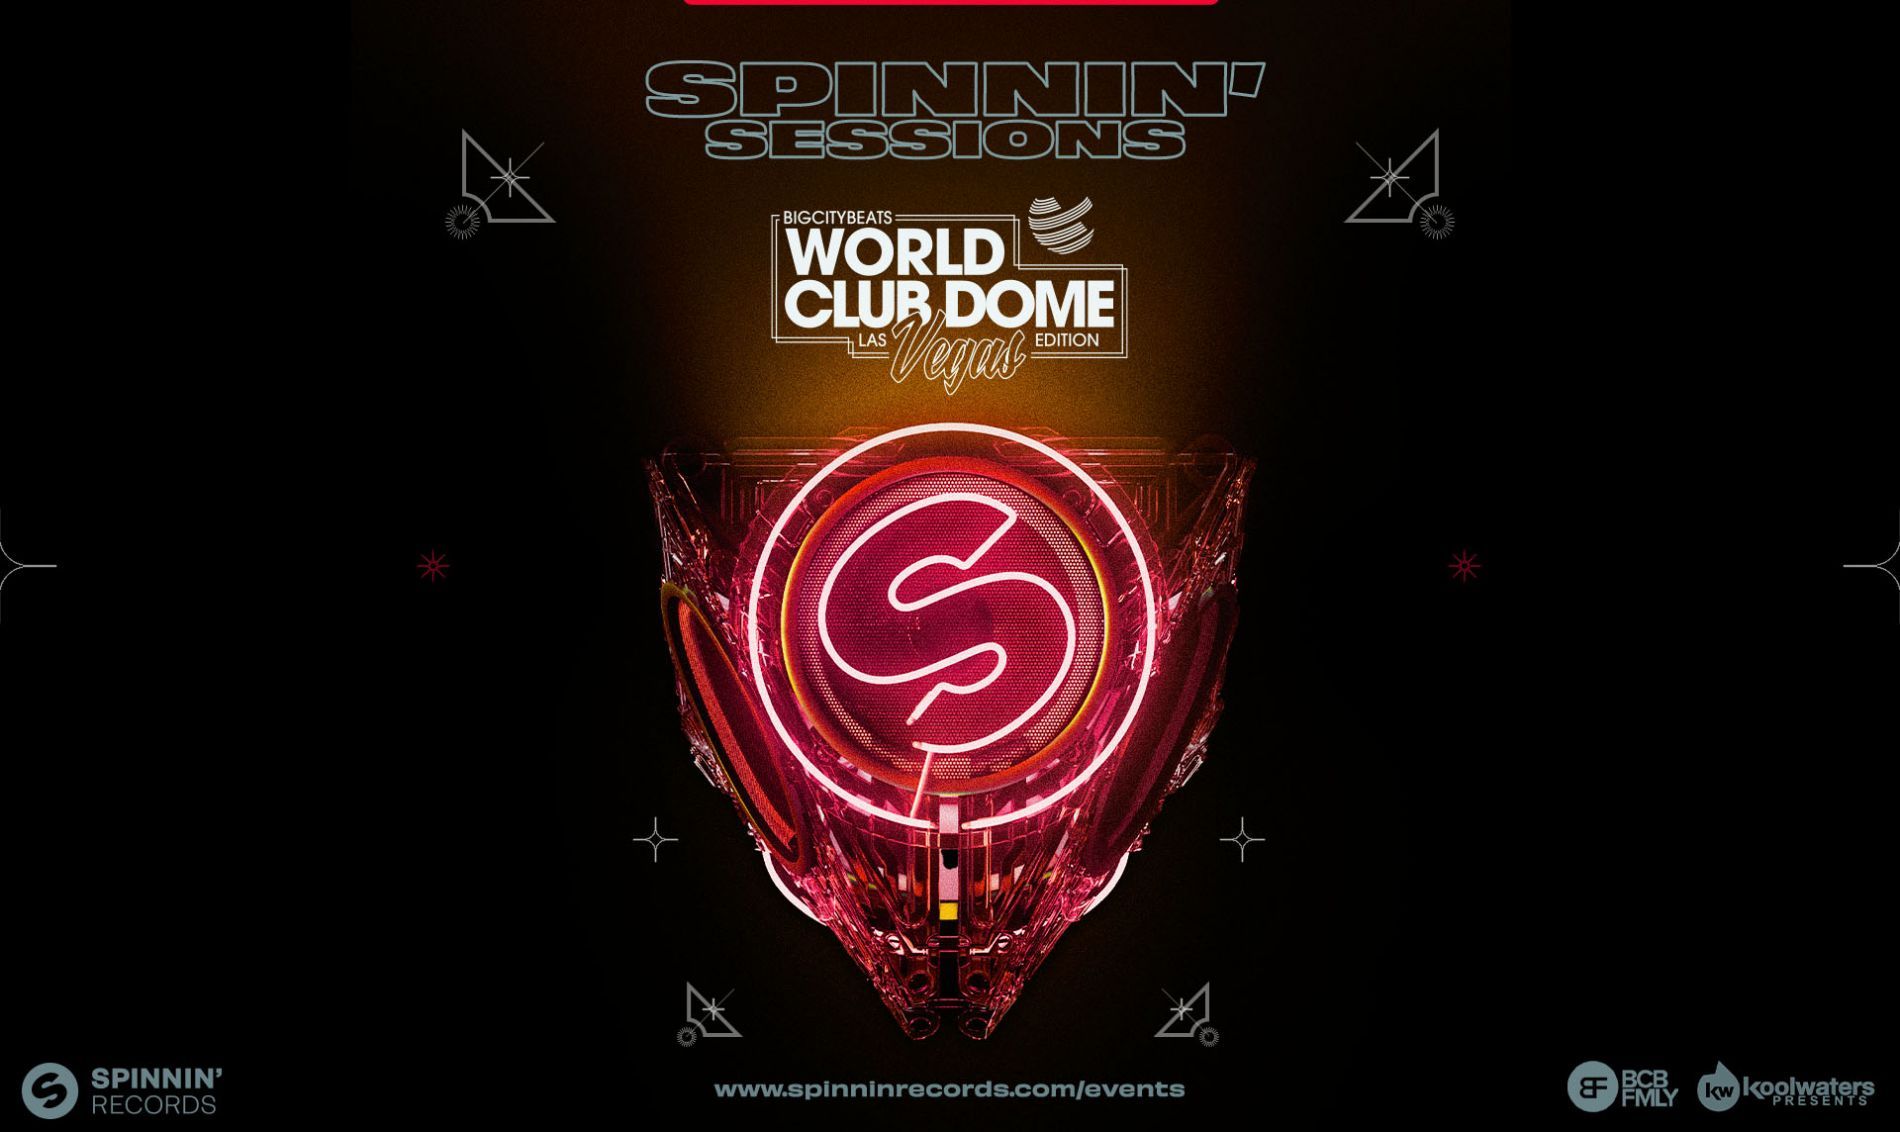 Spinnin' Sessions Spinnin' Sessions | World Club Dome